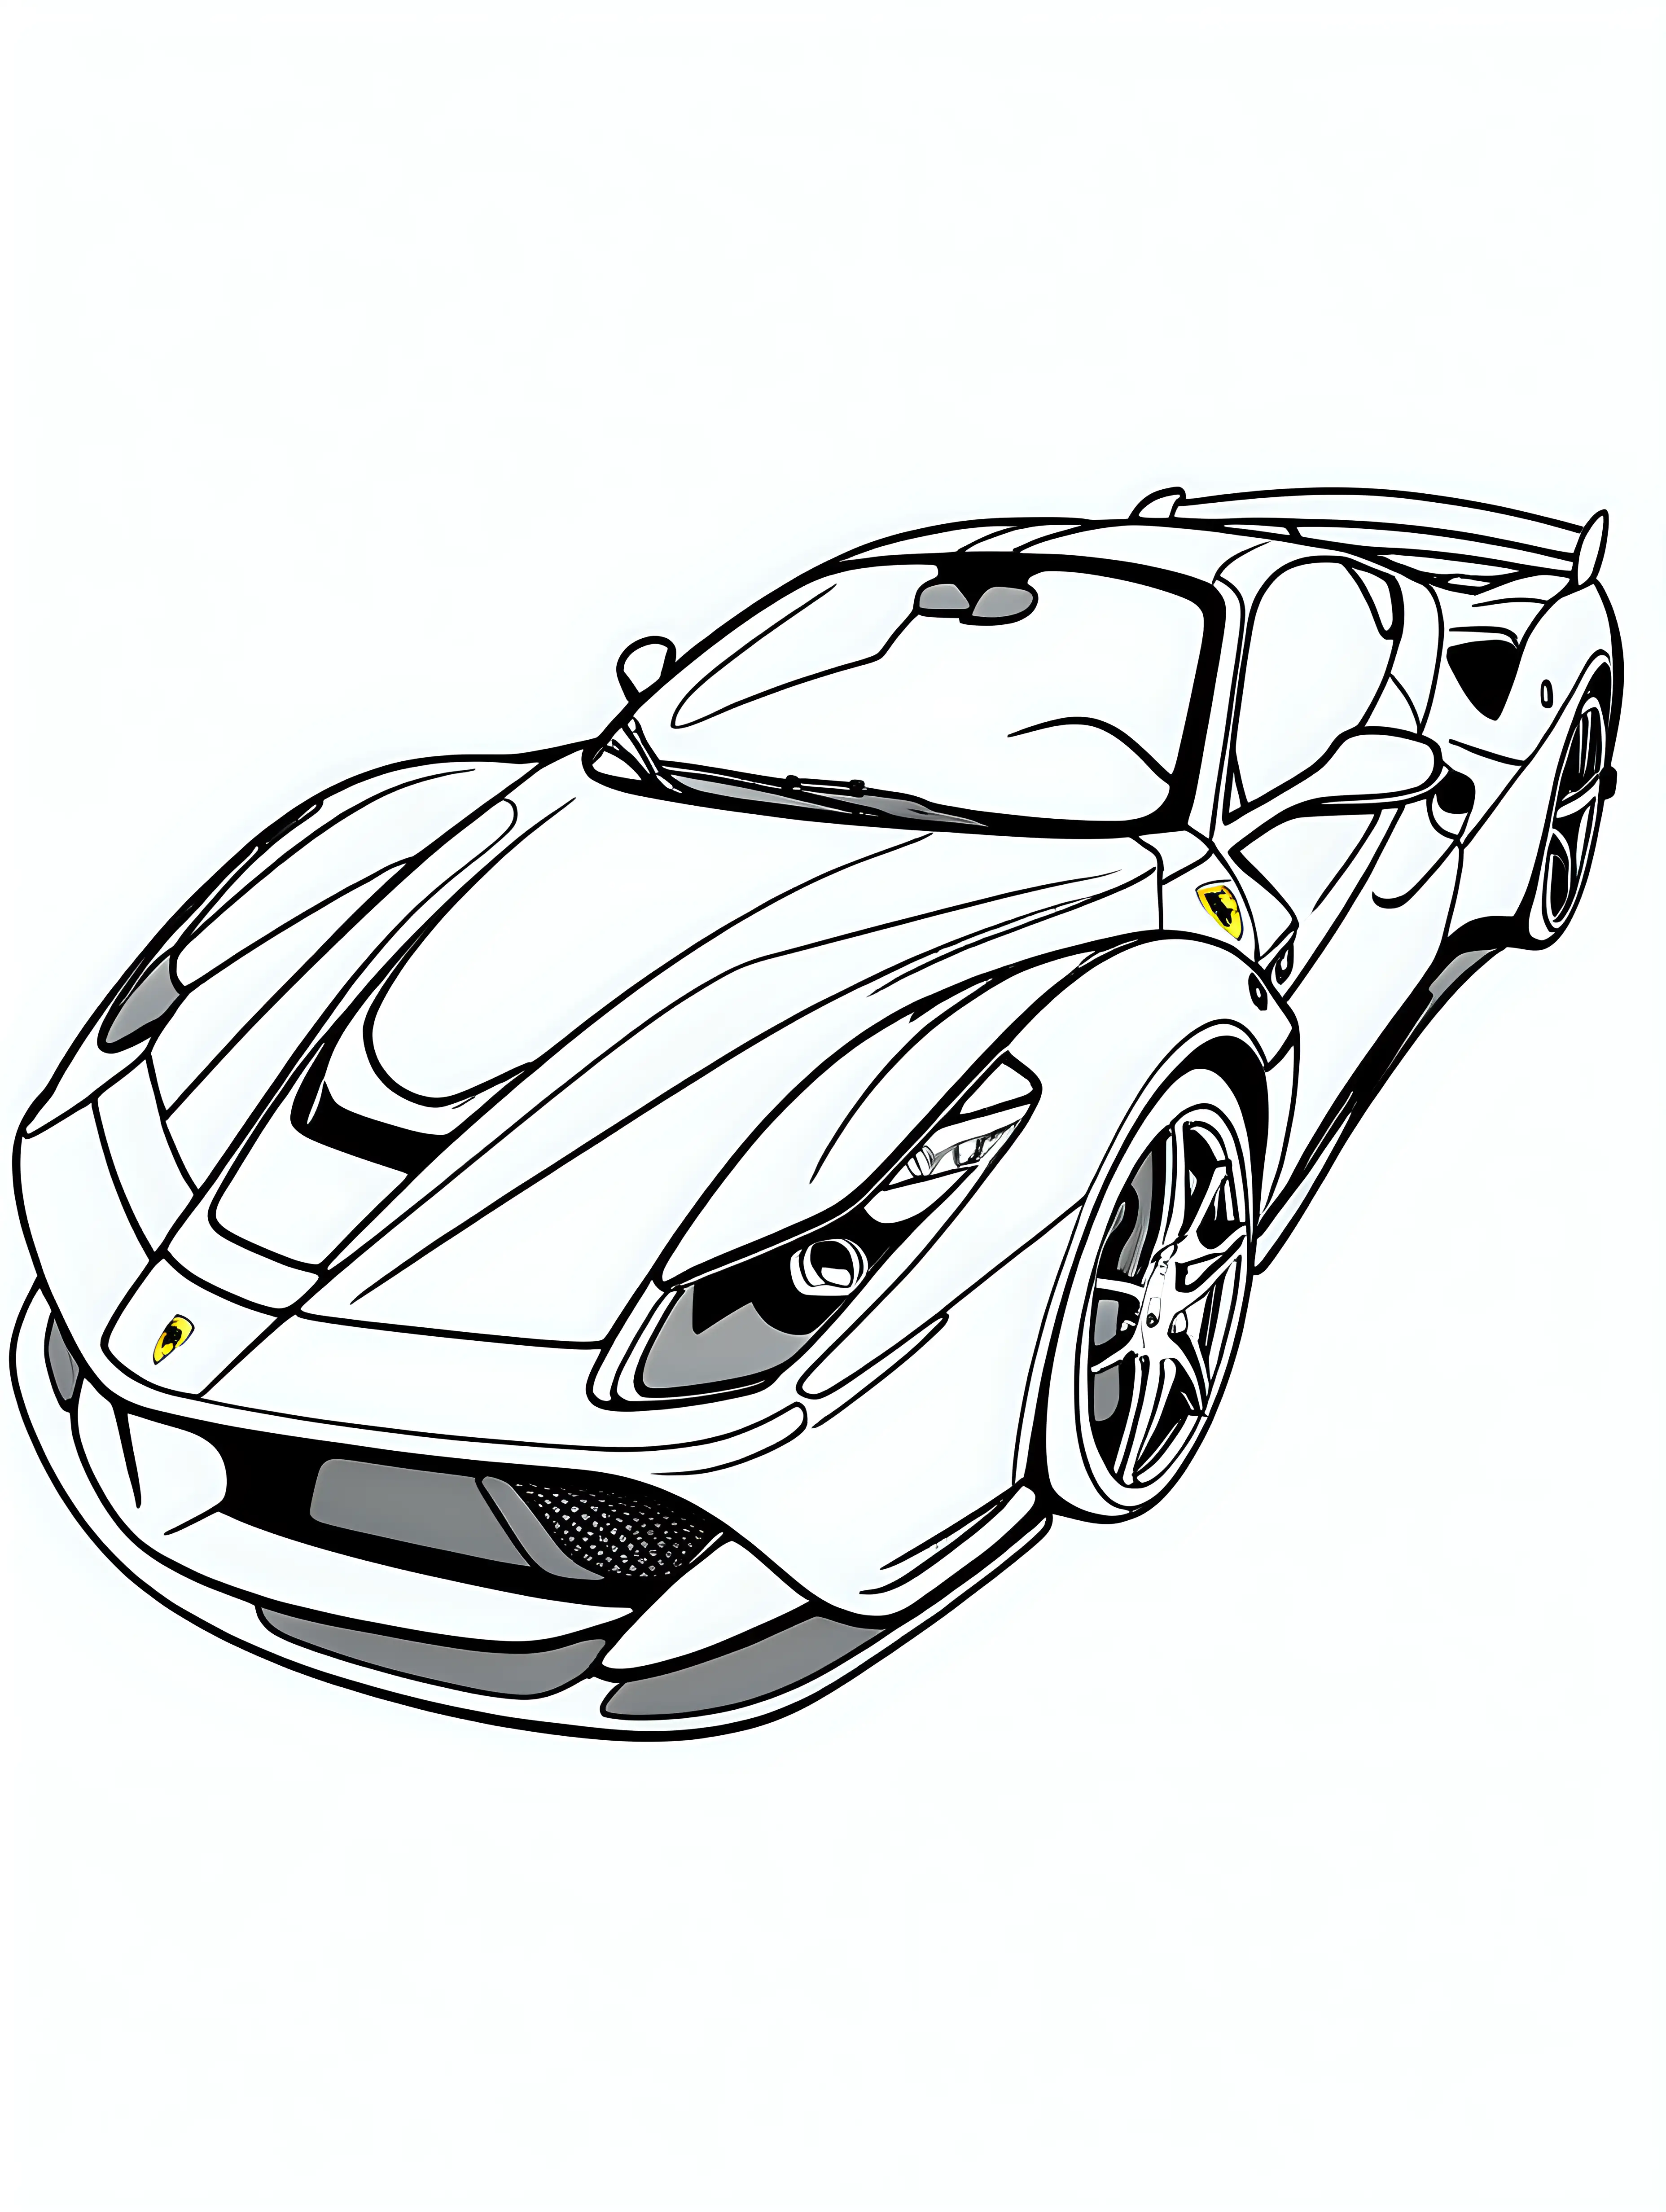 How to Draw a Ferrari - Easy Step-by-Step Guide to Drawing an F12 TDF